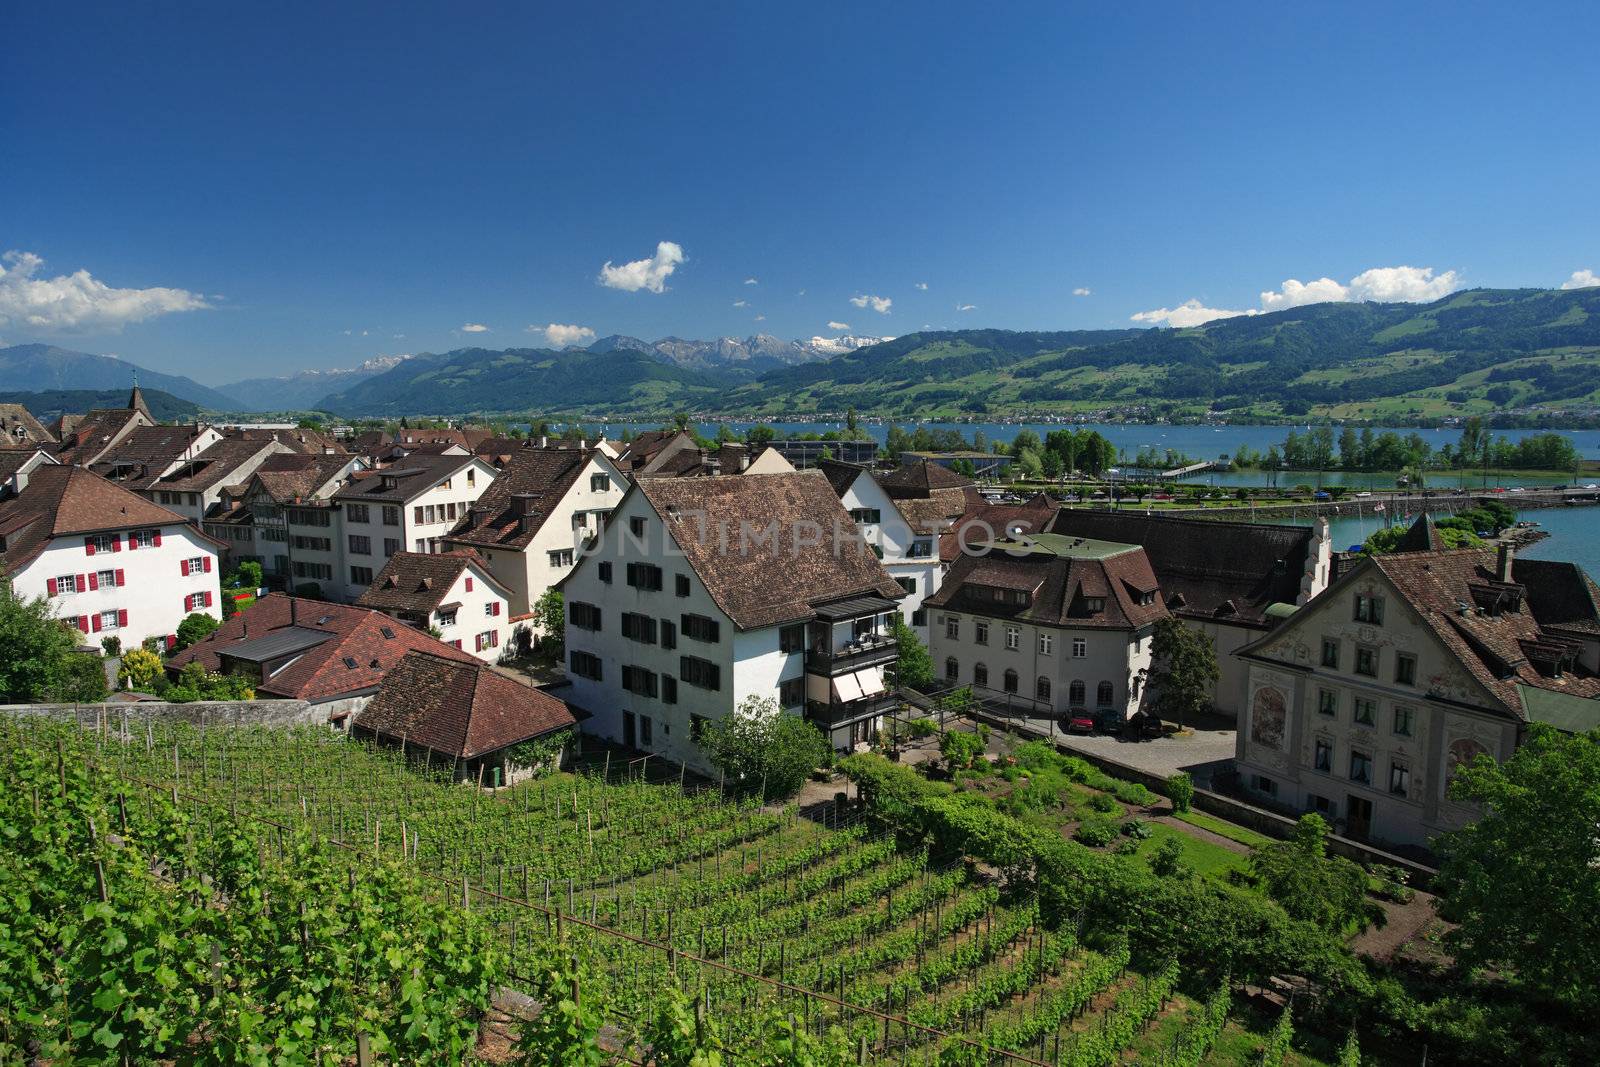 Vineyard in Rapperswil, Switzerland with a view of the Alps and the lake Zurich in the distance.